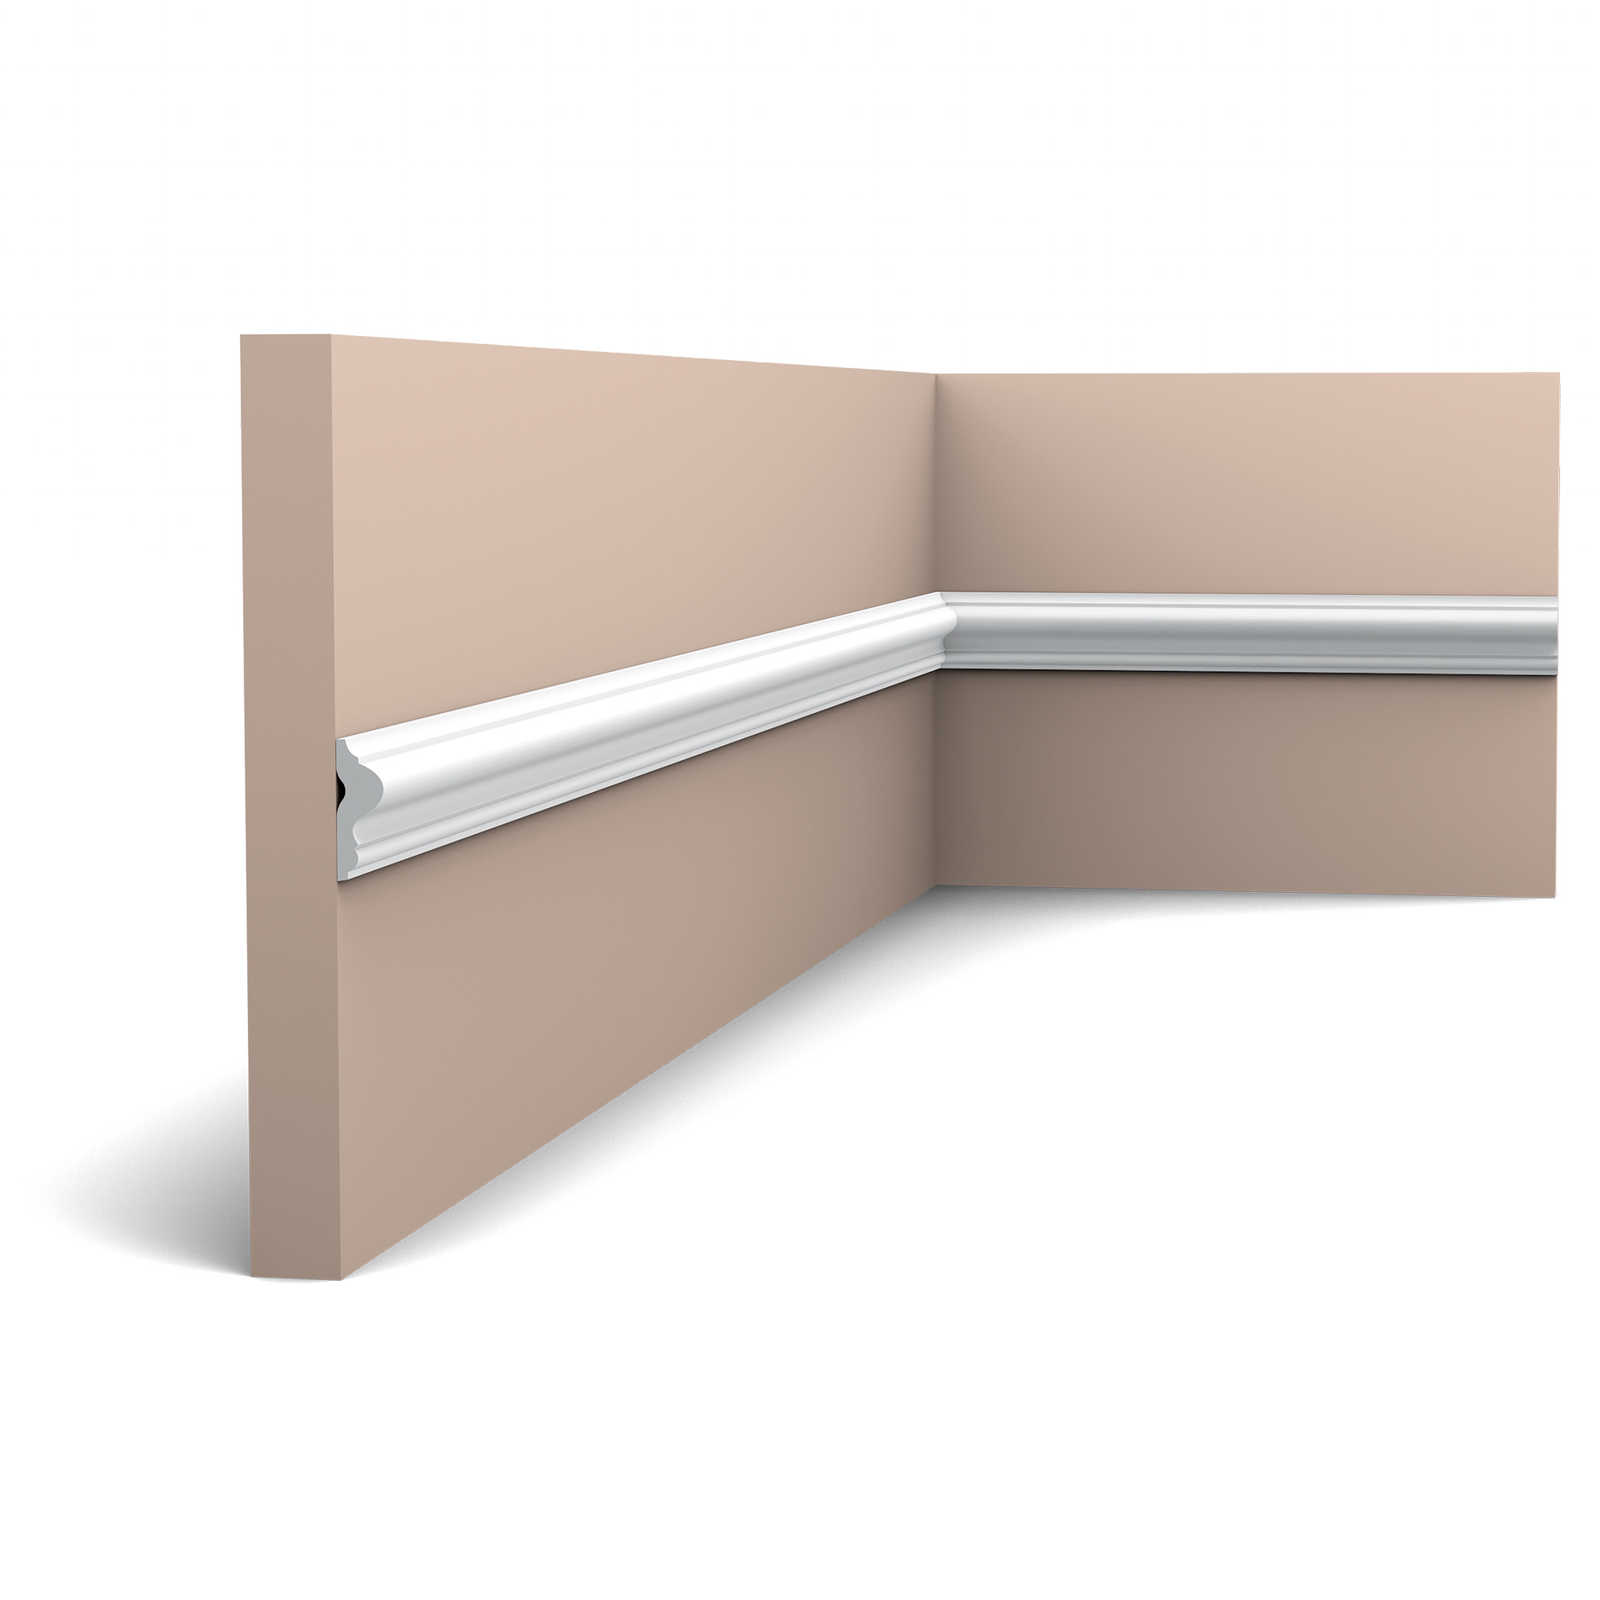 Classic wall moulding Ouro - Preto - PX201
